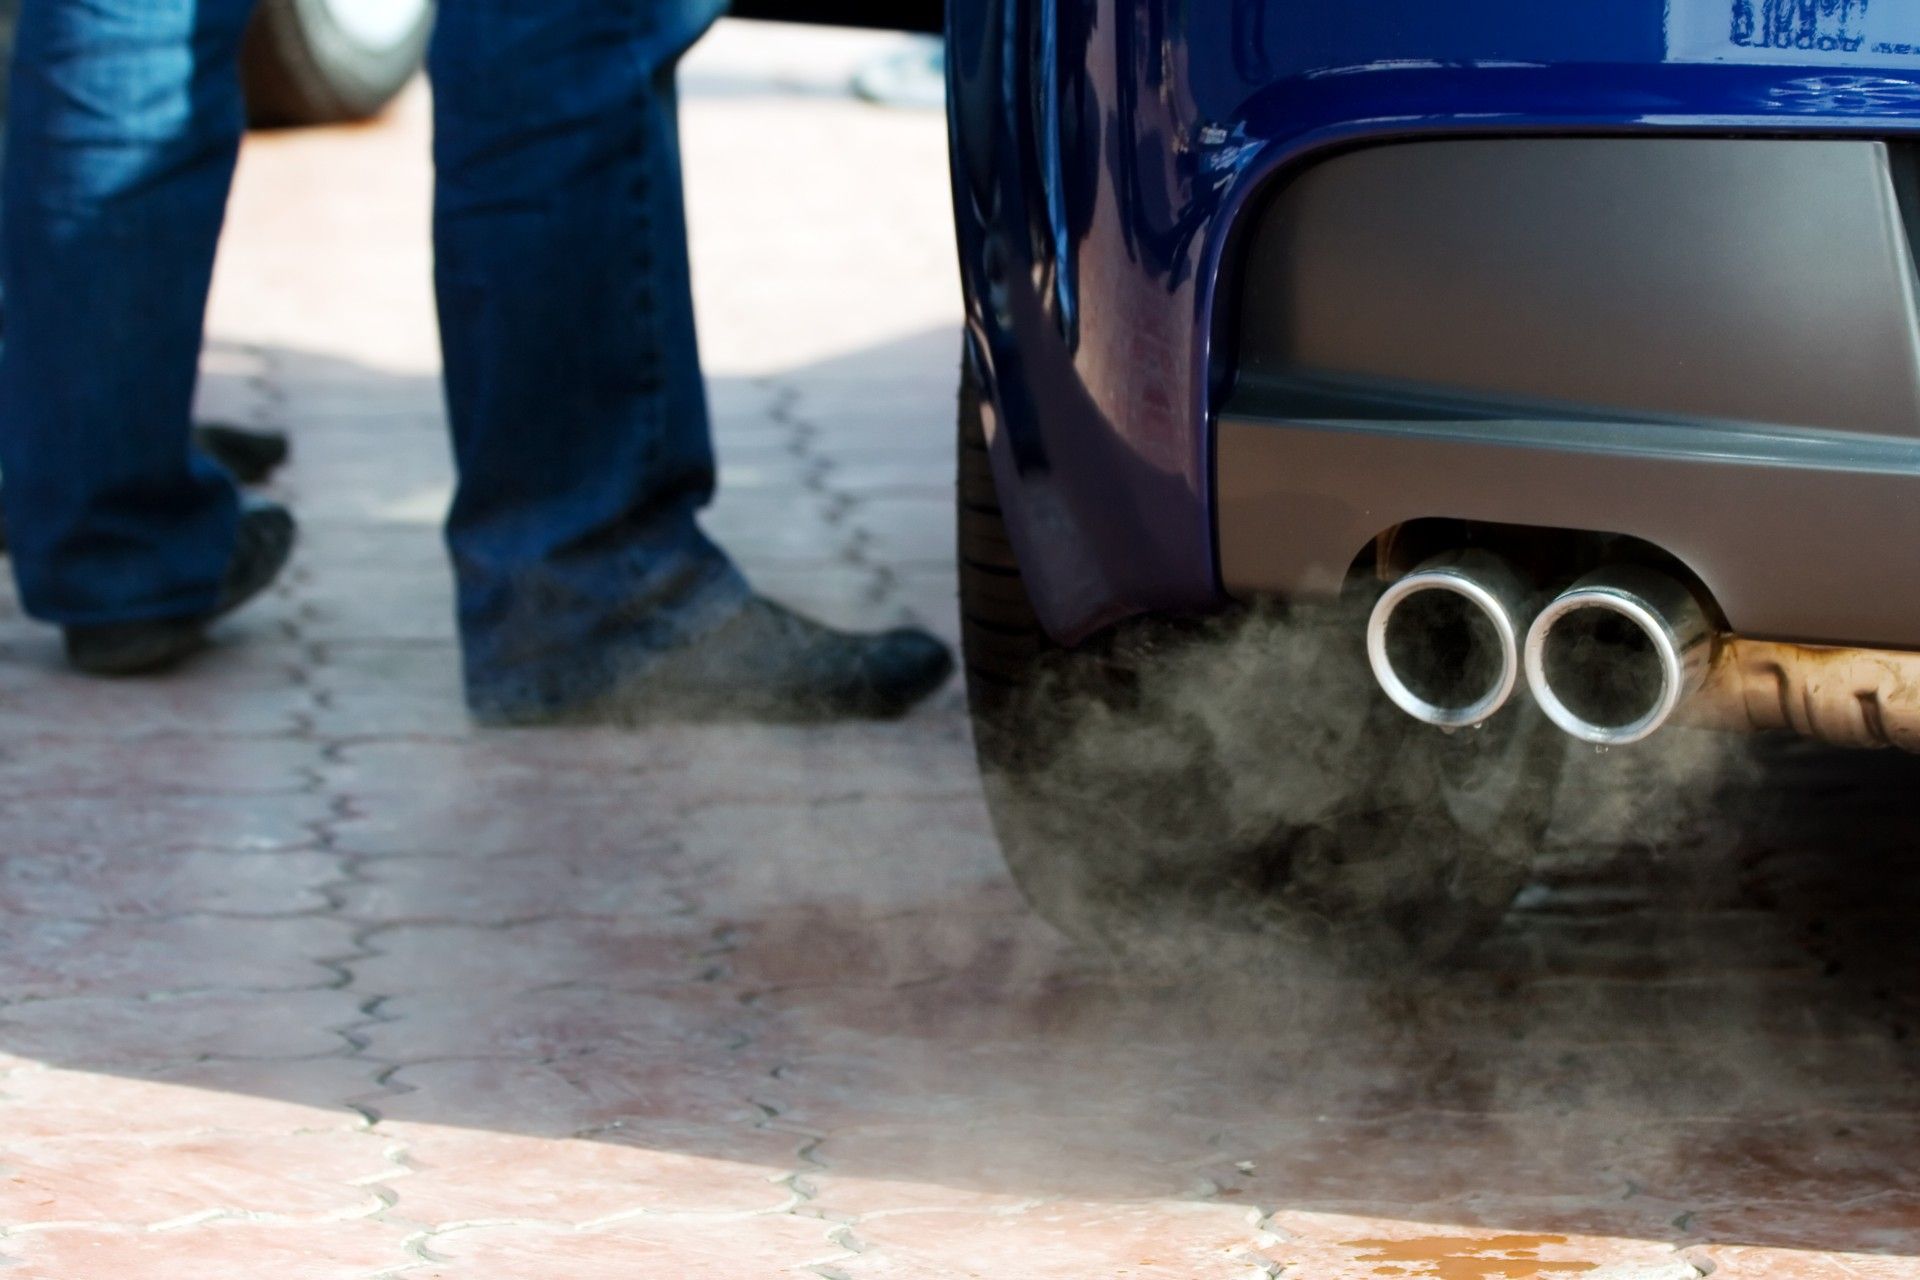 Low shot of a person's legs near a vehicle that has exhaust coming from the exhaust pipe - vehicle emissions